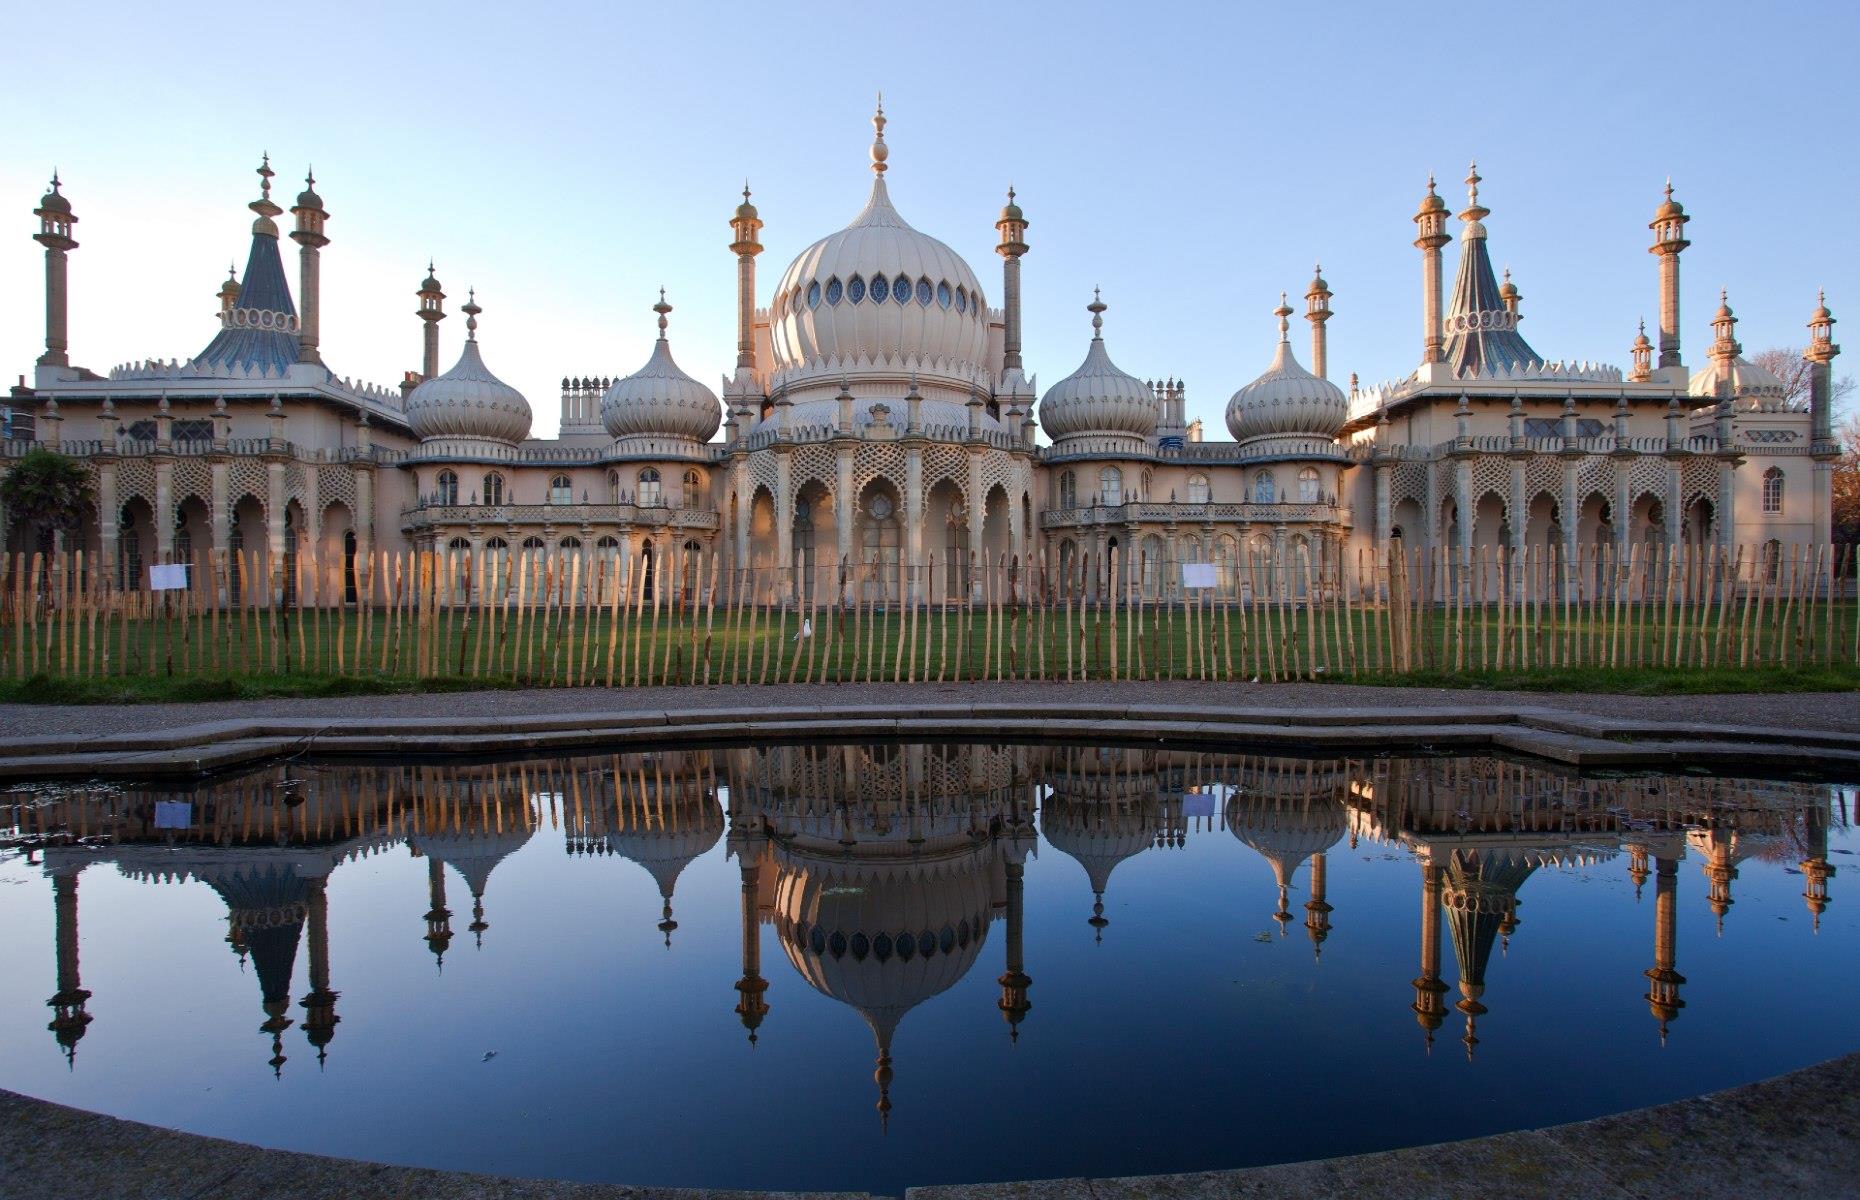 <p>One of Brighton’s most recognisable sights, the distinct domes and minarets of the <a href="https://brightonmuseums.org.uk/royalpavilion/">Royal Pavilion</a> give the palace its unique charm. The royal residence was built in the late 18th century in an Indo-Saracenic architectural style, with influences from India and China, as a seaside retreat for George IV. Today, the building is open to the public and is home to one of the few fully restored Regency gardens in the country.</p>